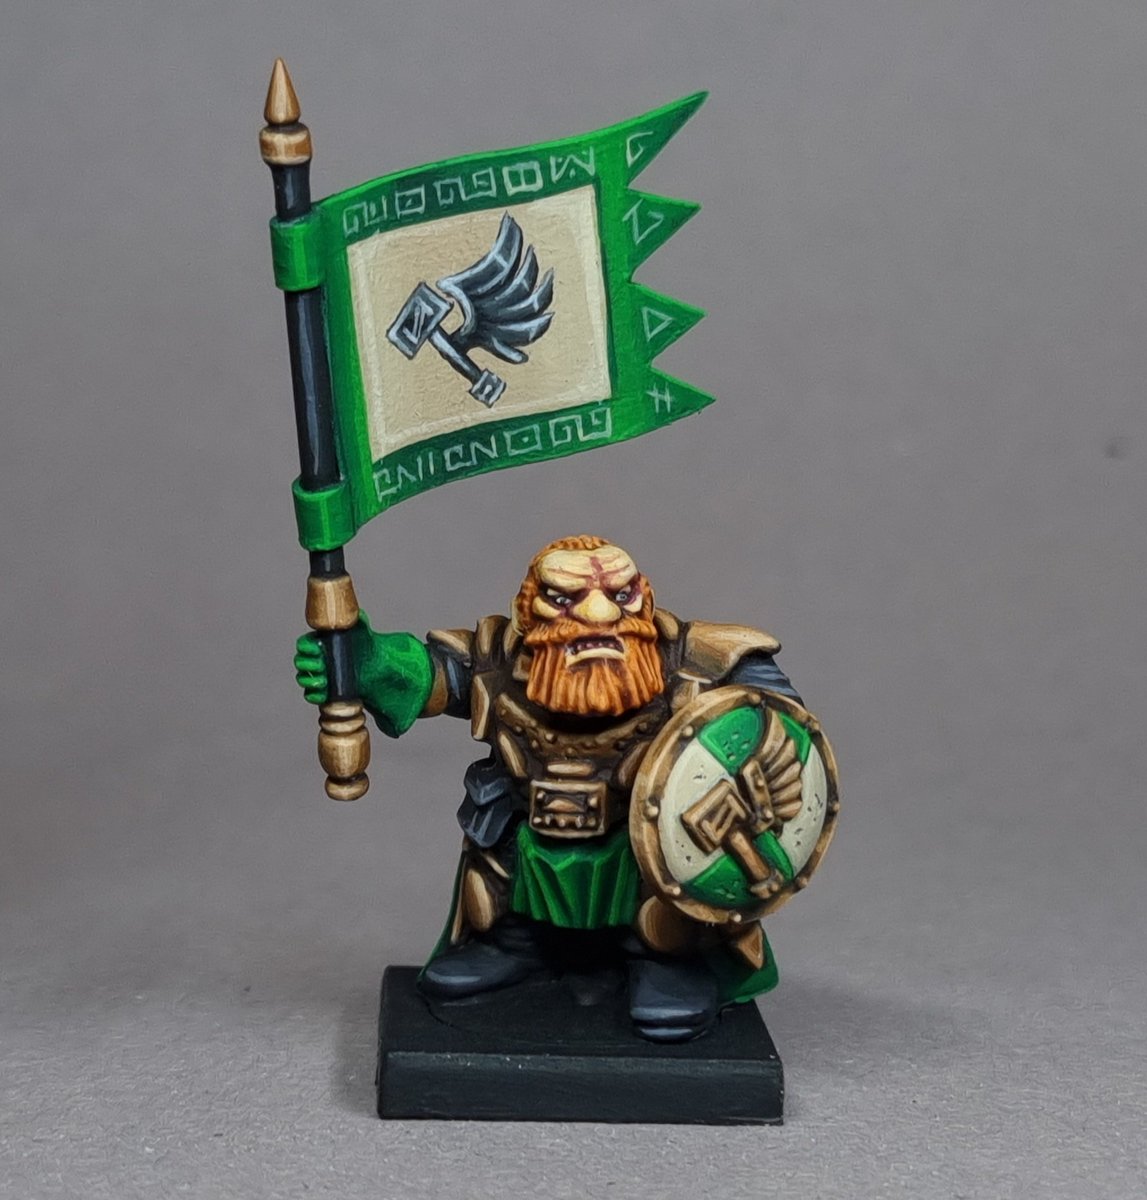 Ranulph Thunderbrow carries the clan banner as a great honour. He also carries an ancient relic shield into battle. An artifact from times long past, some say best forgotten. 

#warmongers
#mymantic